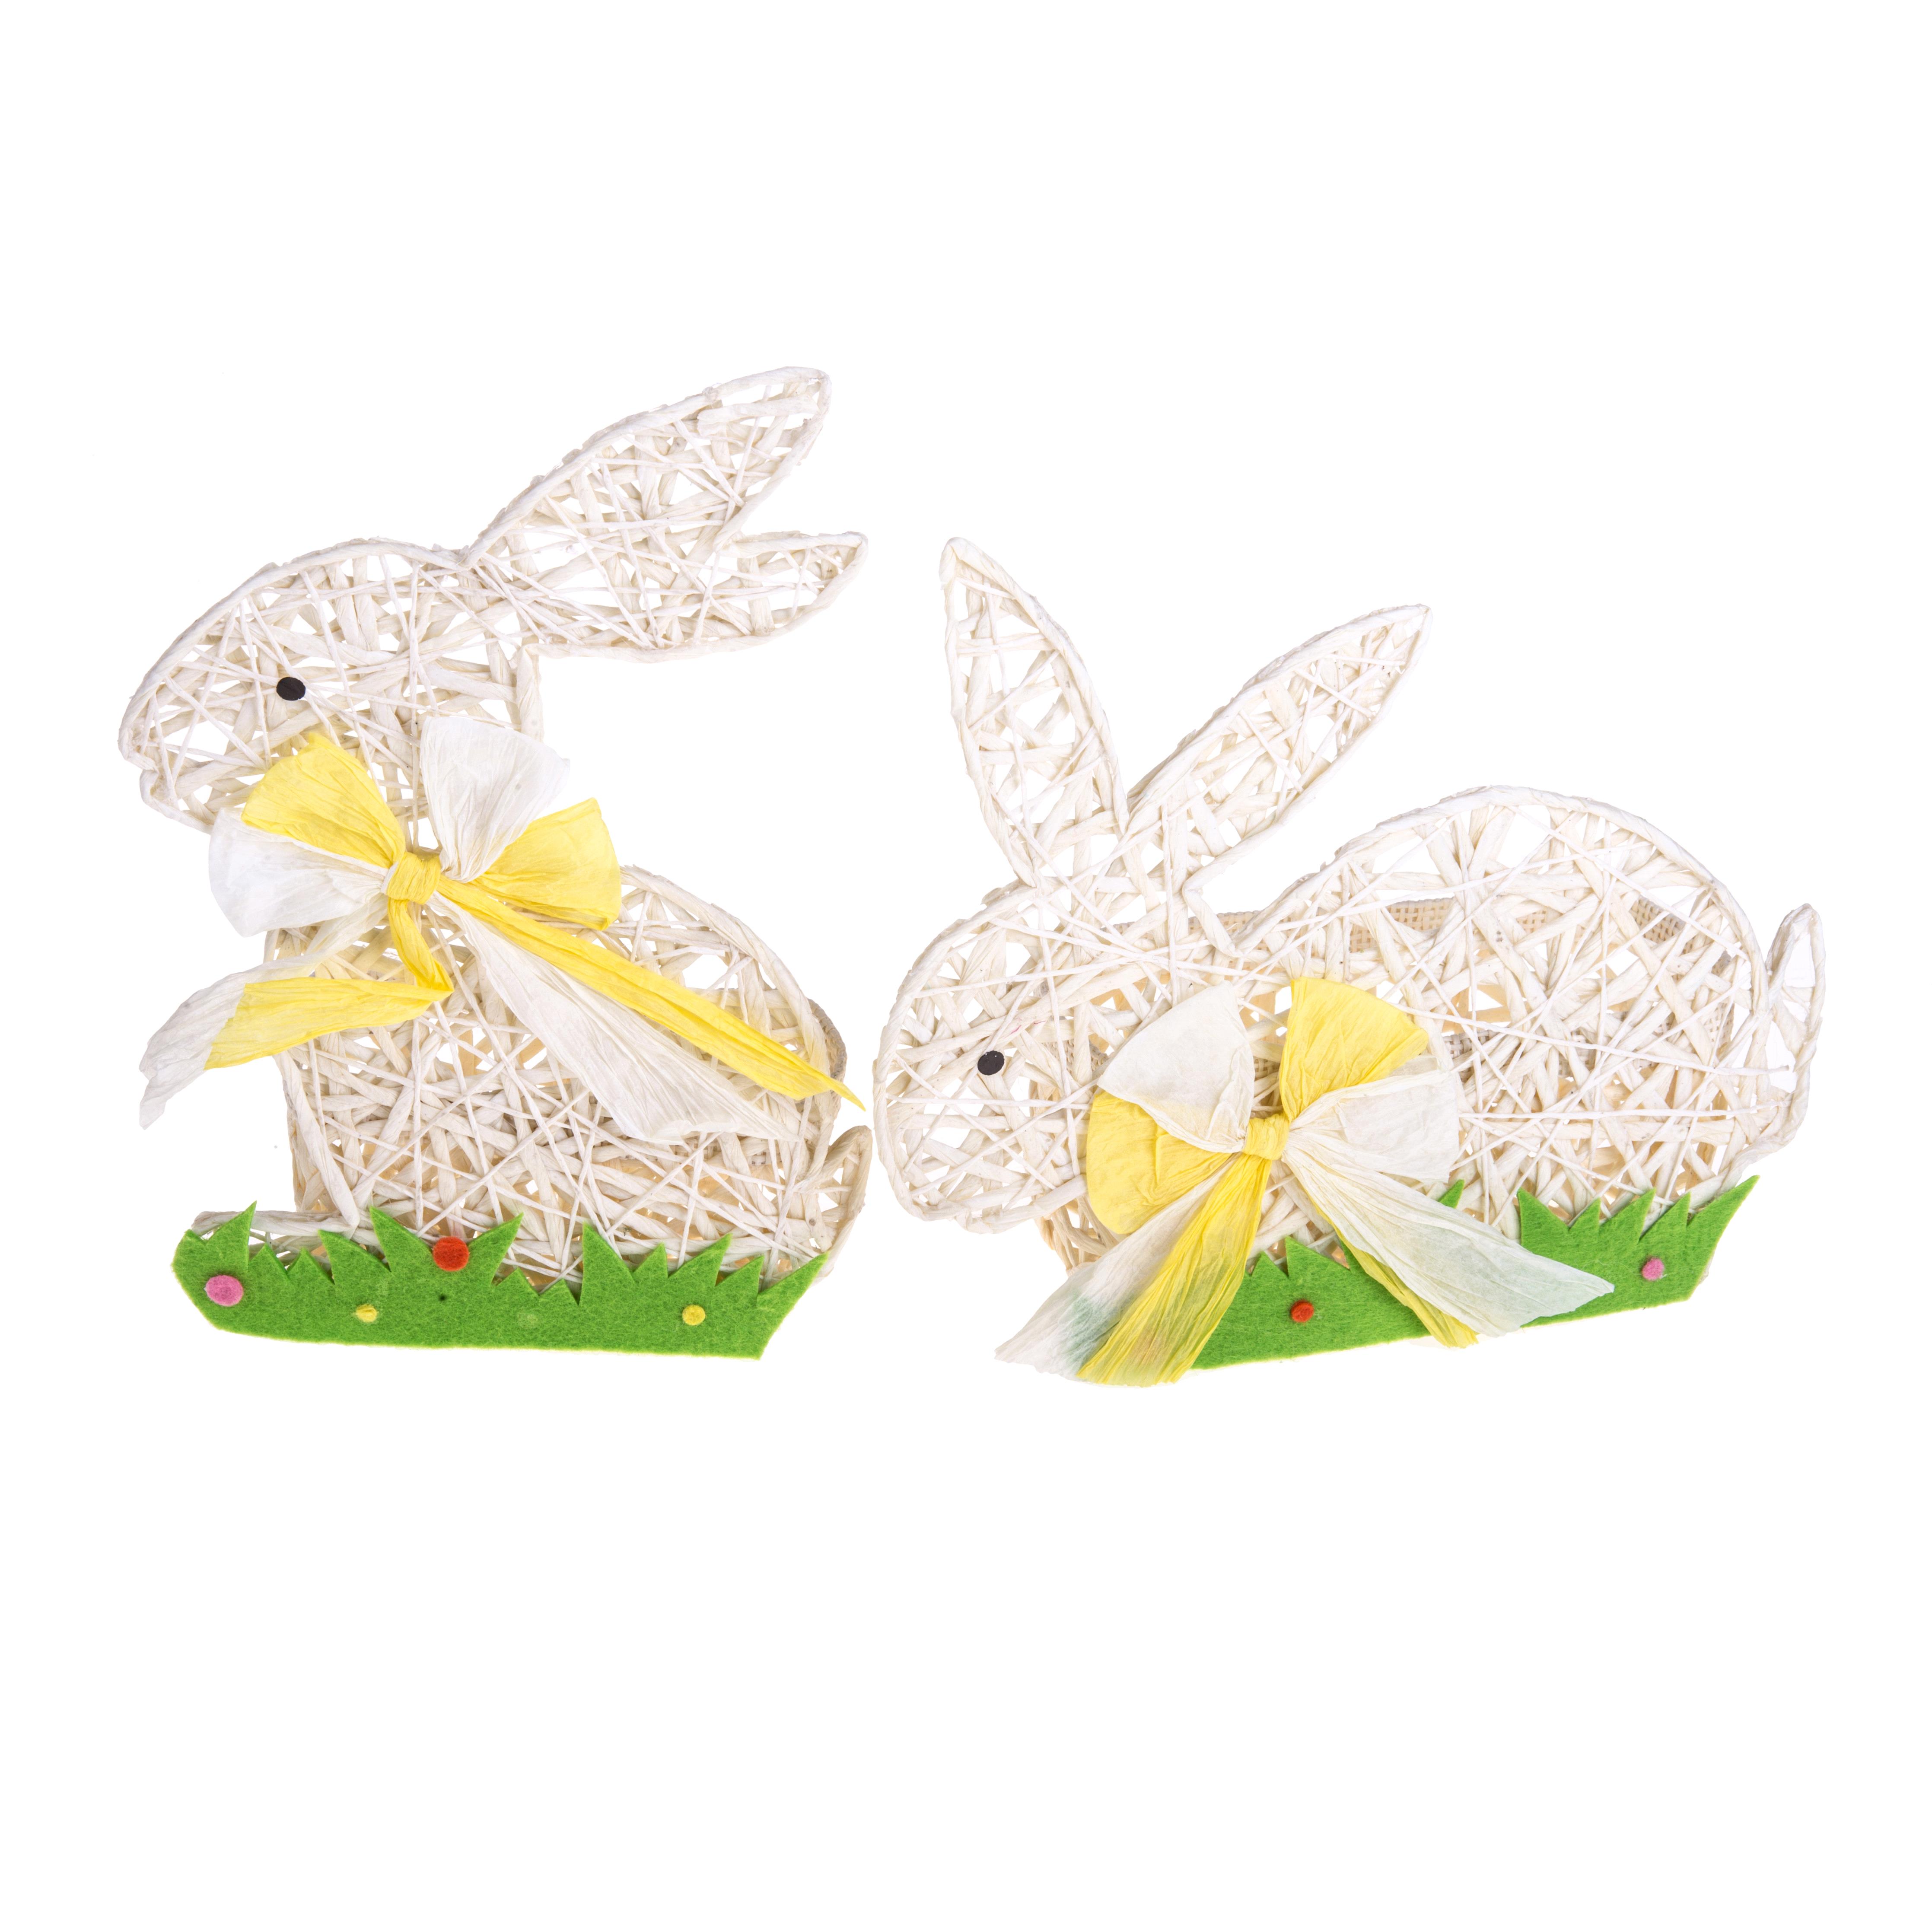 SPRING AND EASTER DECORATIONS, ANIMALS, SET/2 CONIGLI CONTENITORE 26 CM